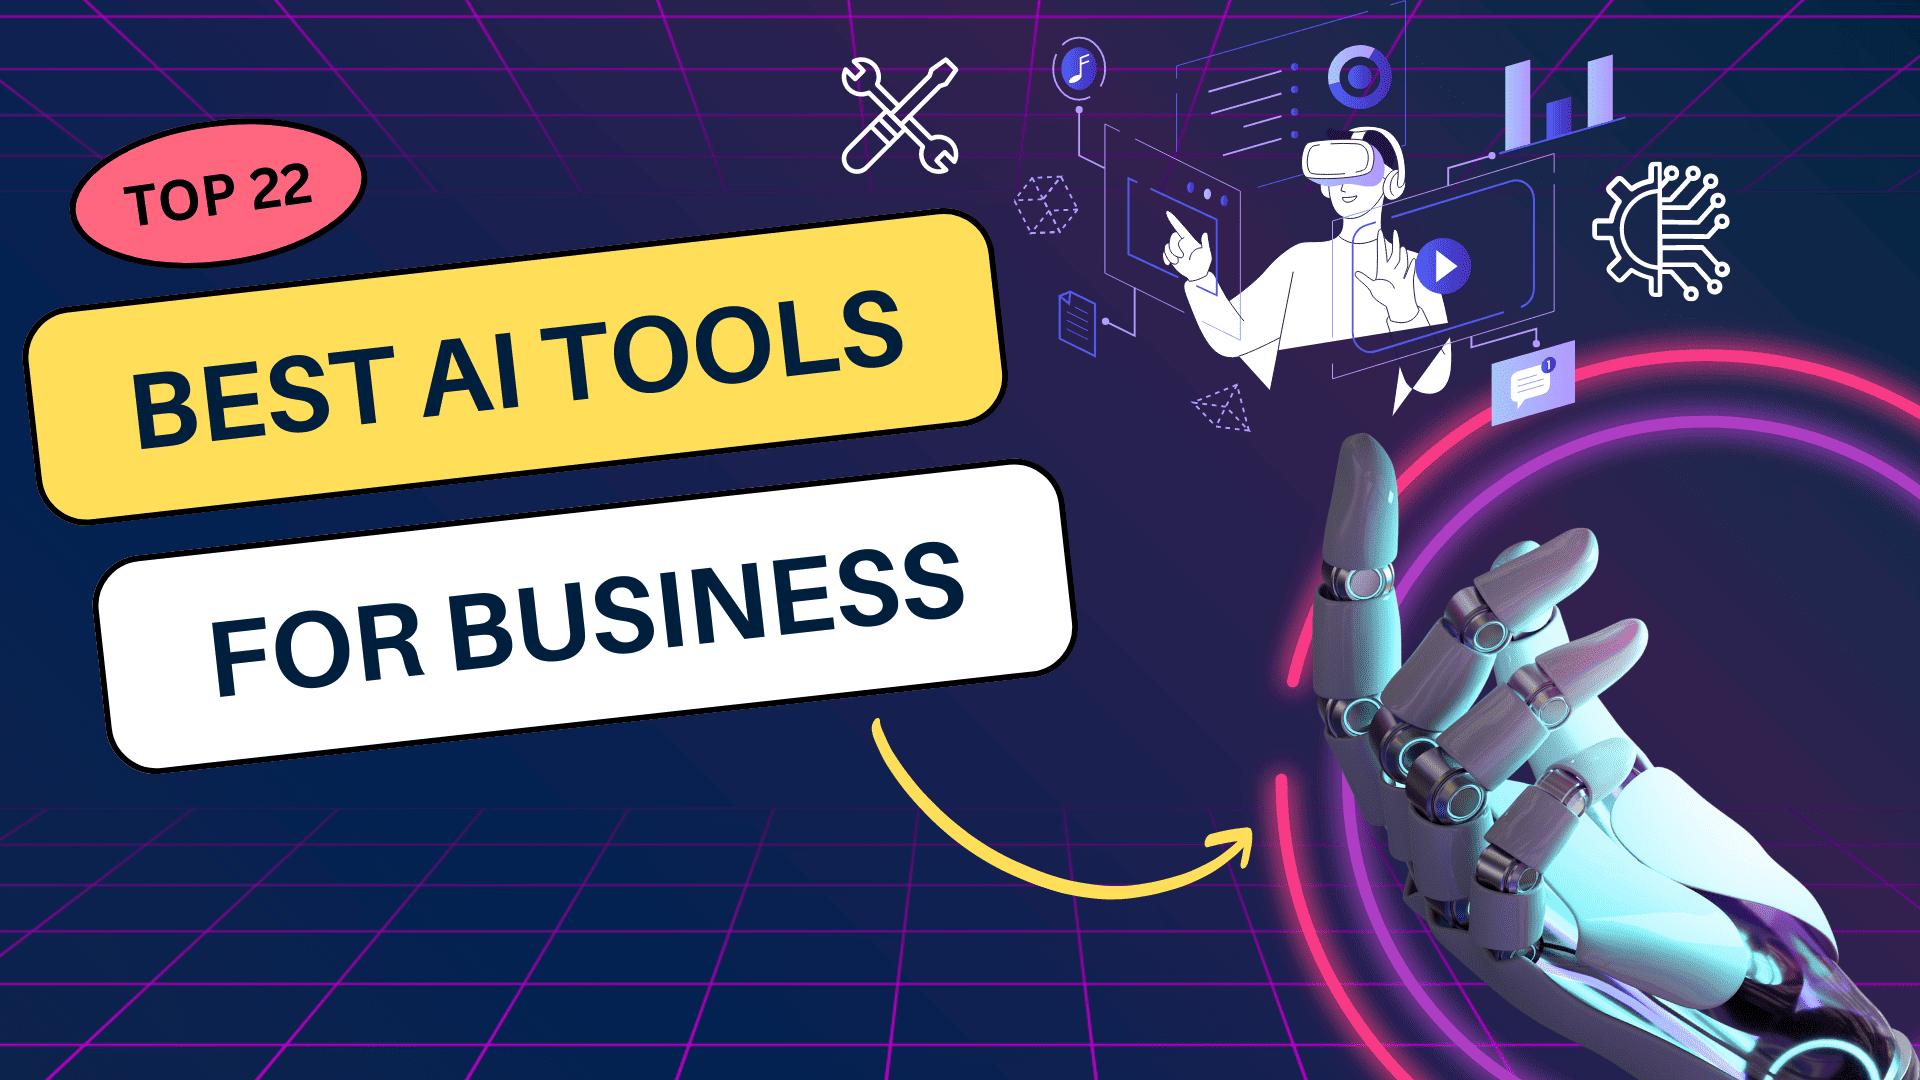 ai tools for business